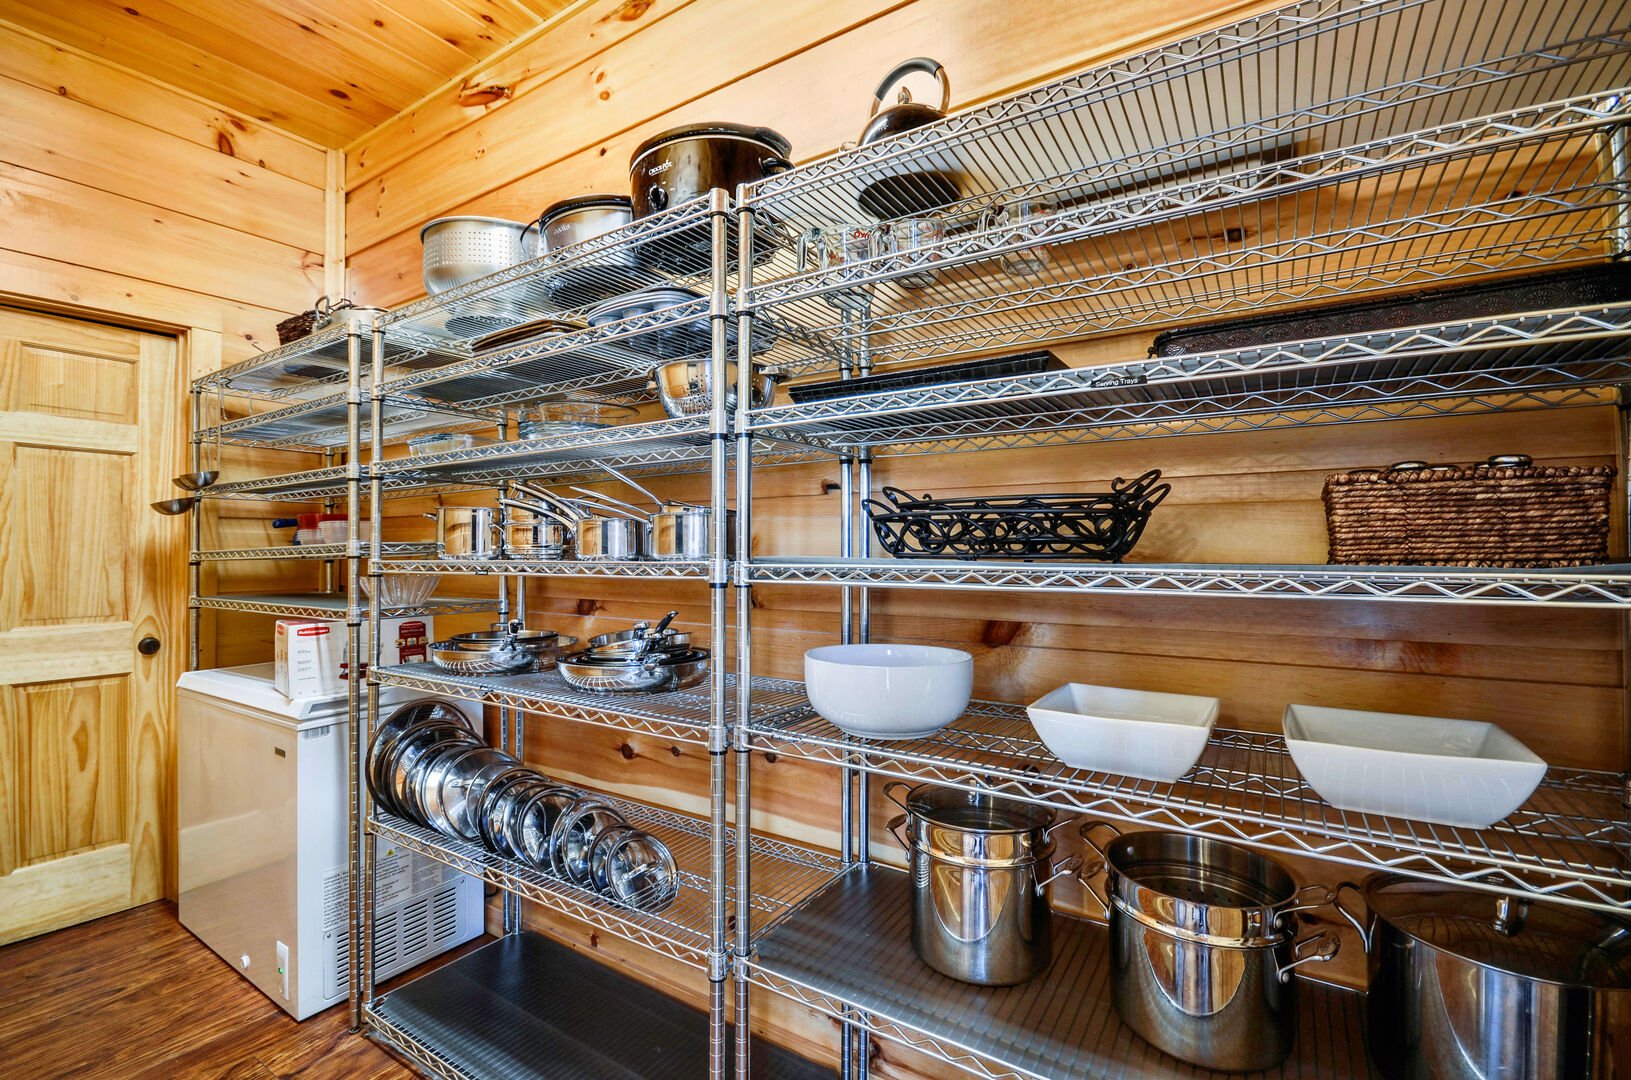 Guests Can Enjoy a Large Pantry.